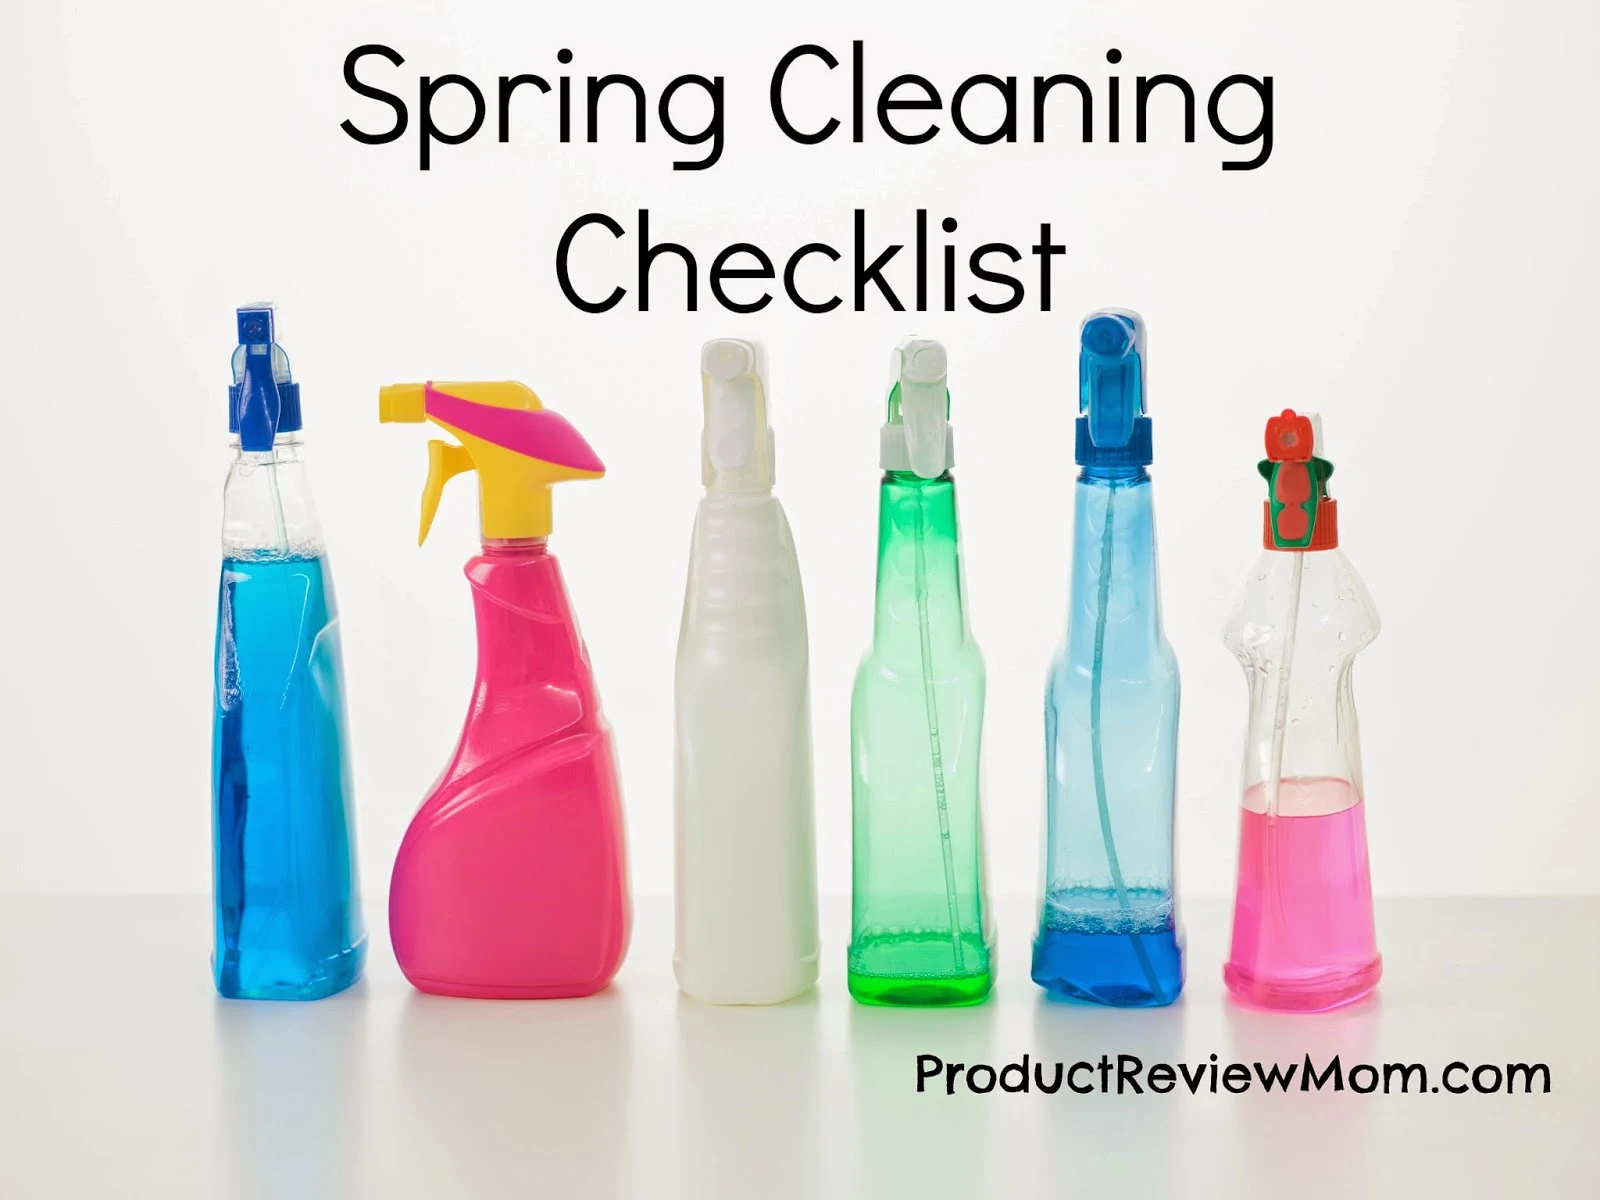 Spring Cleaning Checklist to Help You Get it Done Quickly